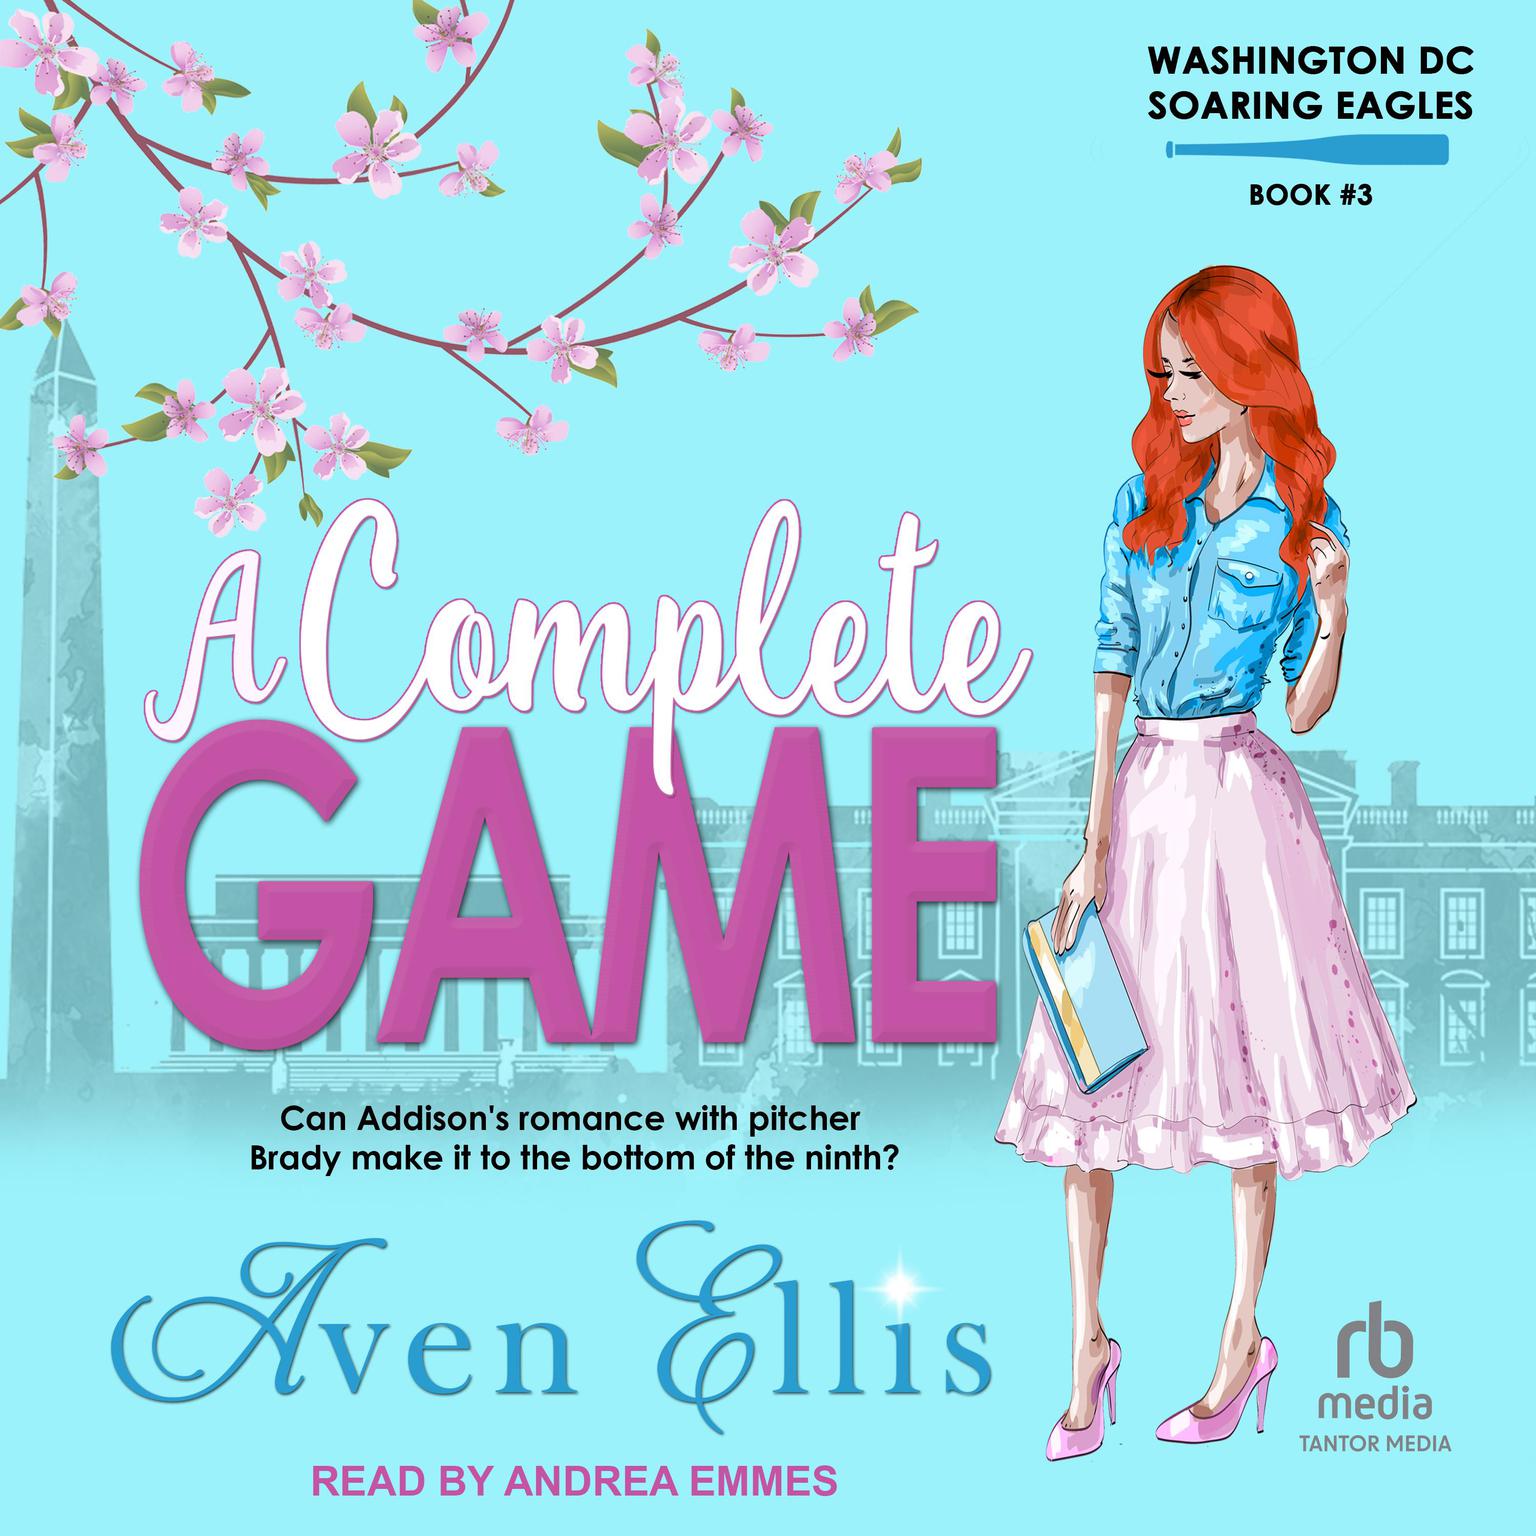 A Complete Game Audiobook, by Aven Ellis